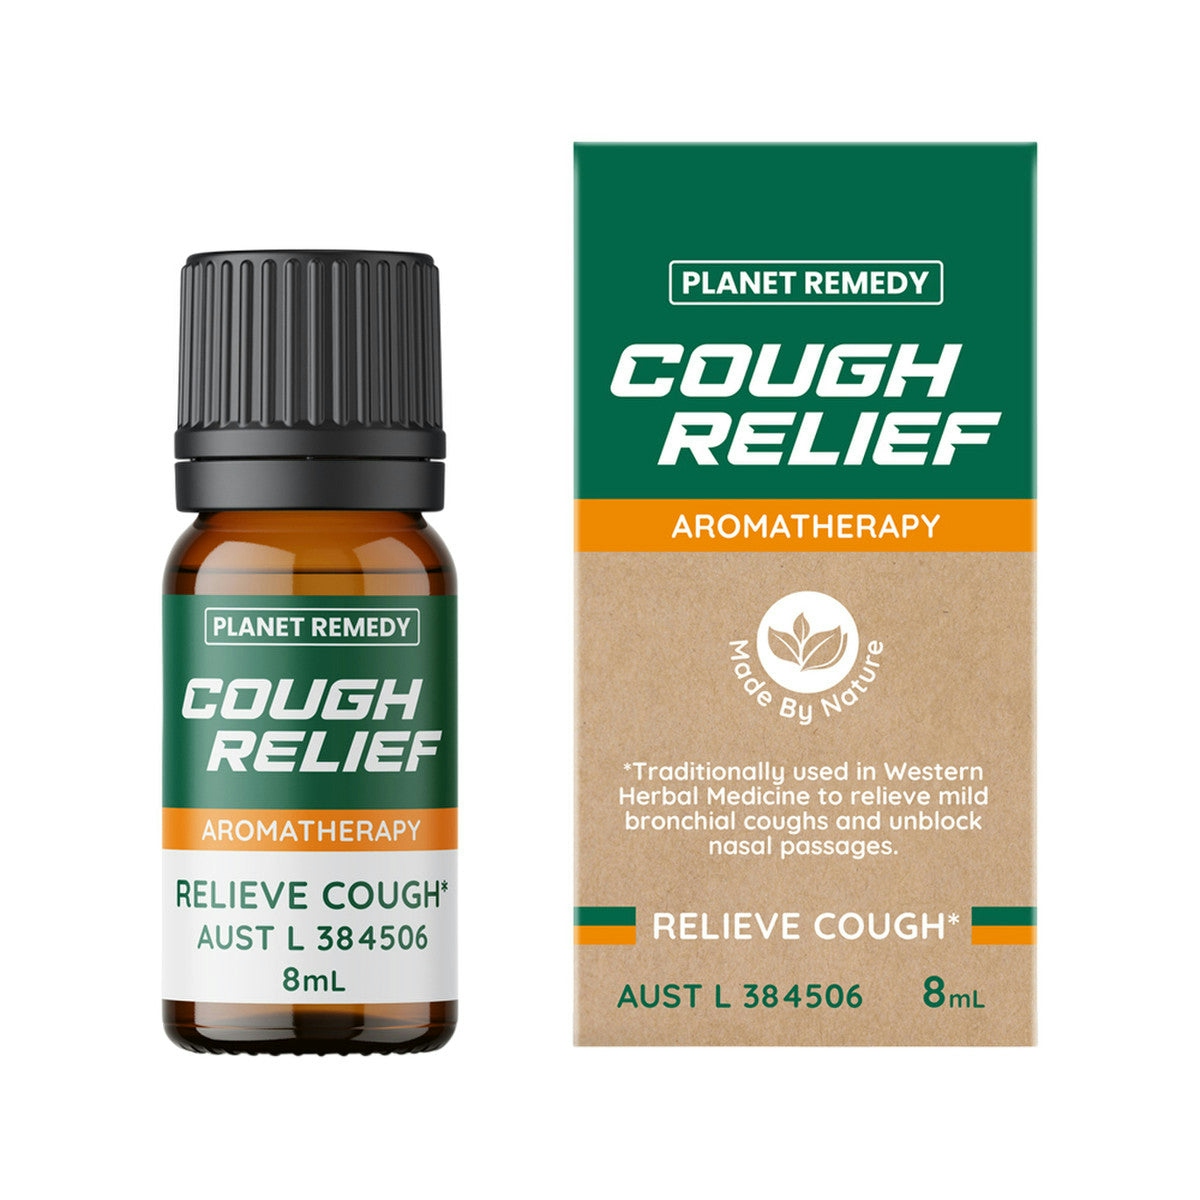 image of Planet Remedy Cough Relief Aromatherapy Oil 8ml on white background